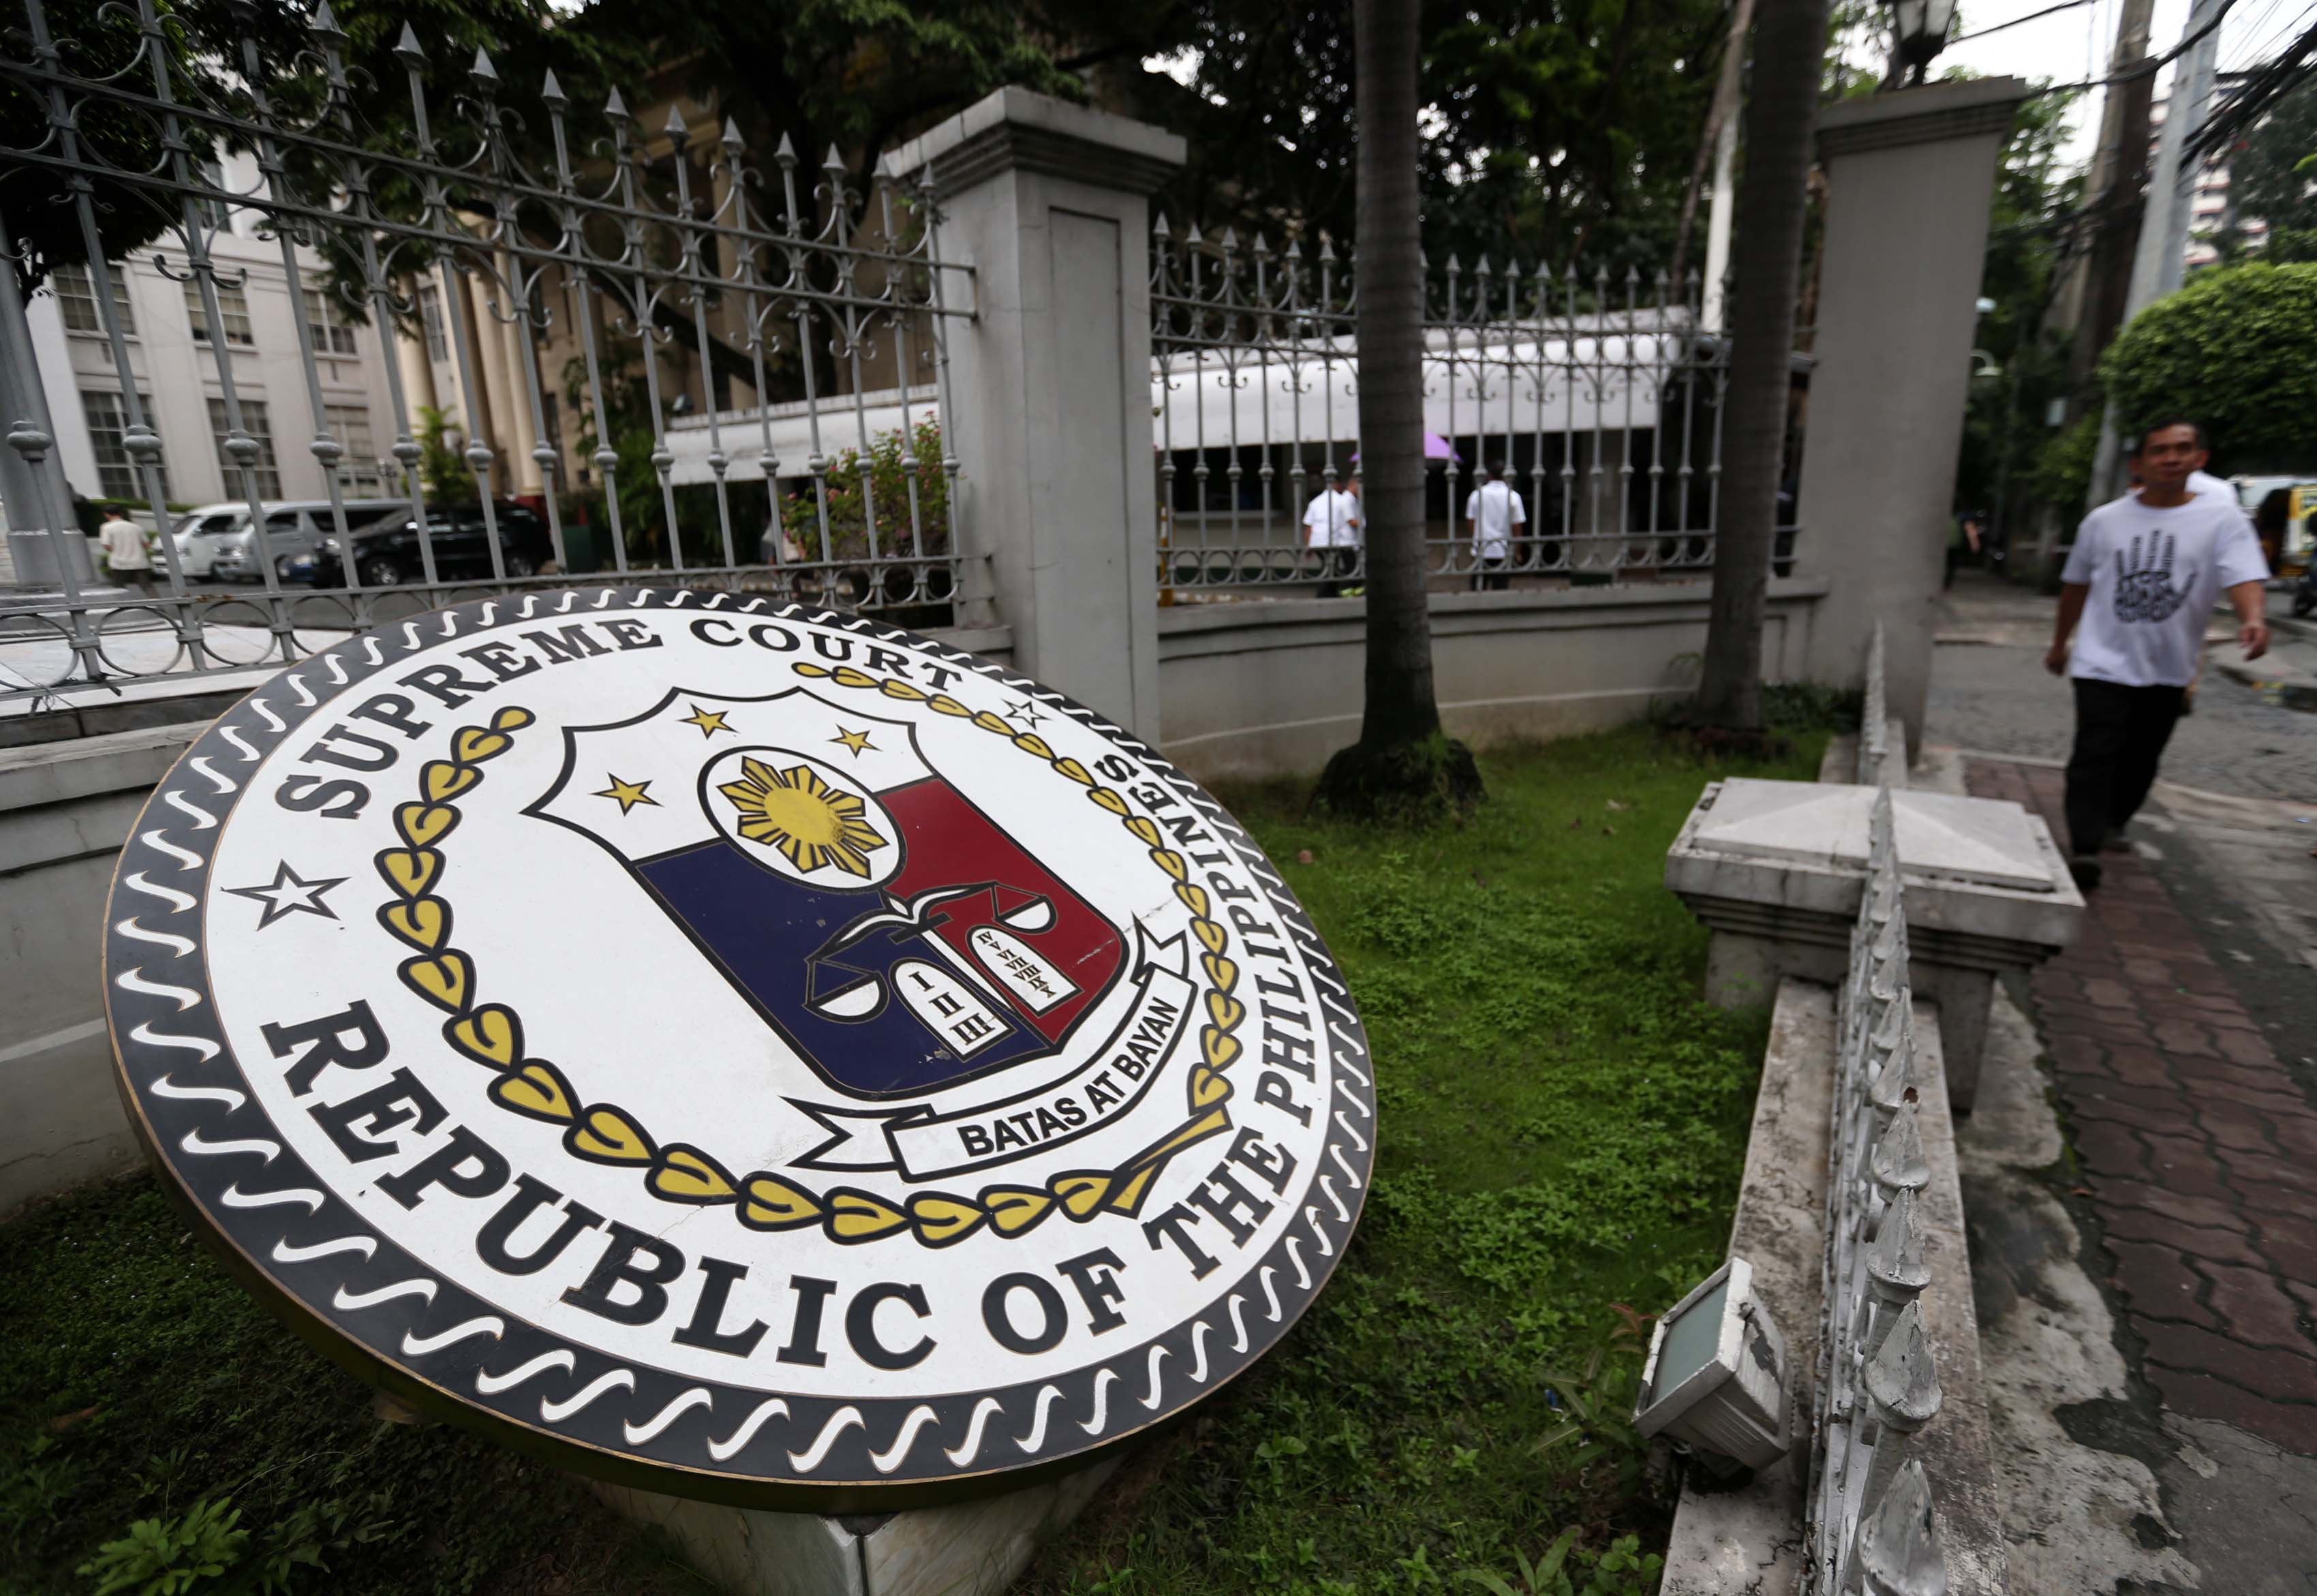 A watchdog group has backed up the Energy Regulatory Commission’s (ERC) move to appeal before the Supreme Court (SC) against a Court of Appeals (CA) ruling that allowed two power generating arms of San Miguel Corporation (SMC) to walk out on power supply deals with Meralco.